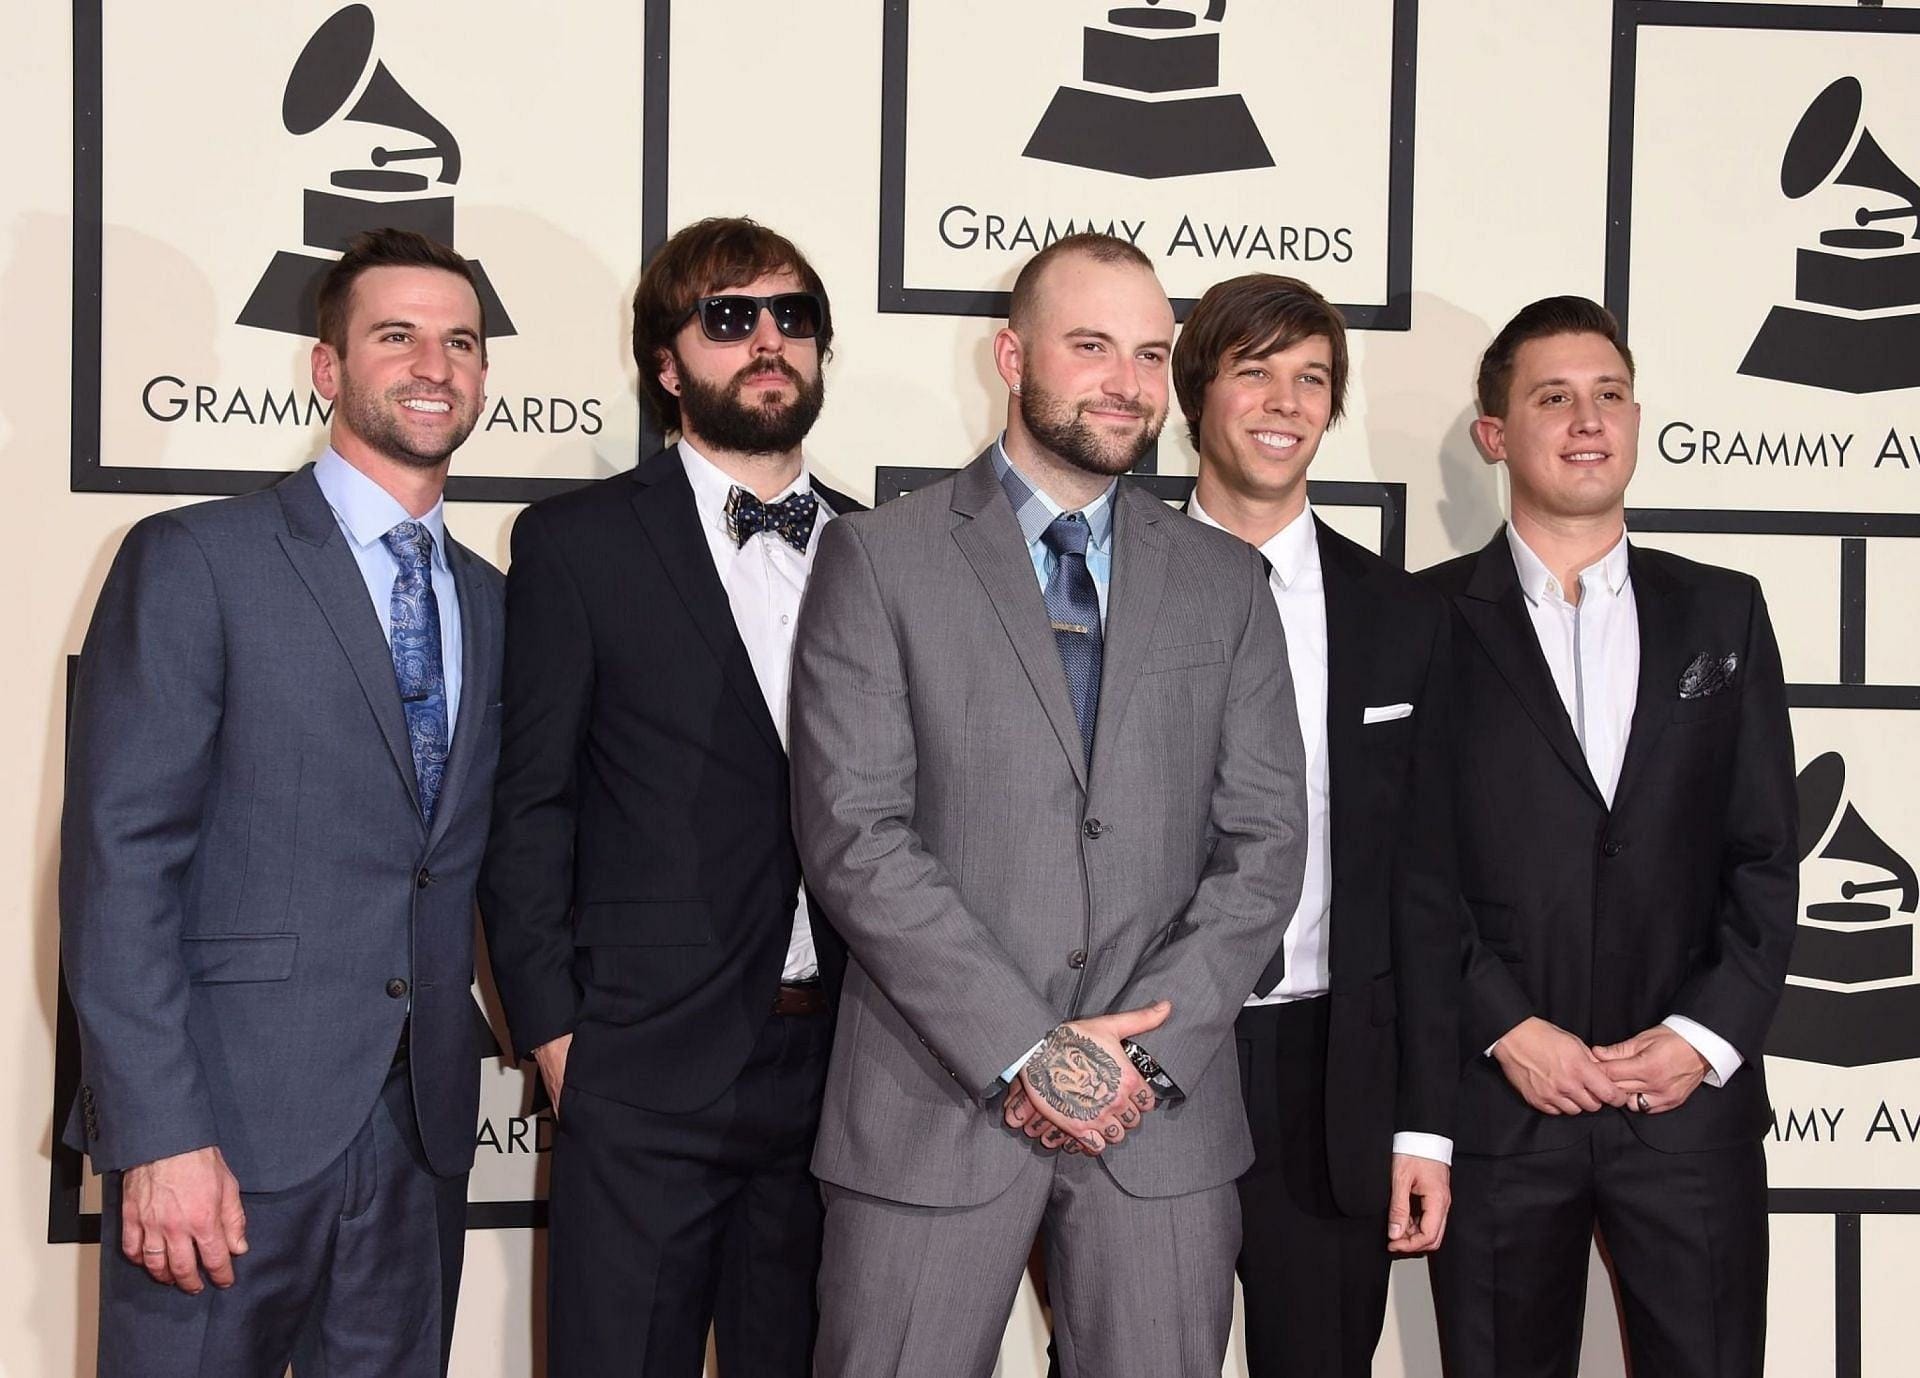 August Burns at the 2016 Grammy Awards (Image via Getty Images)